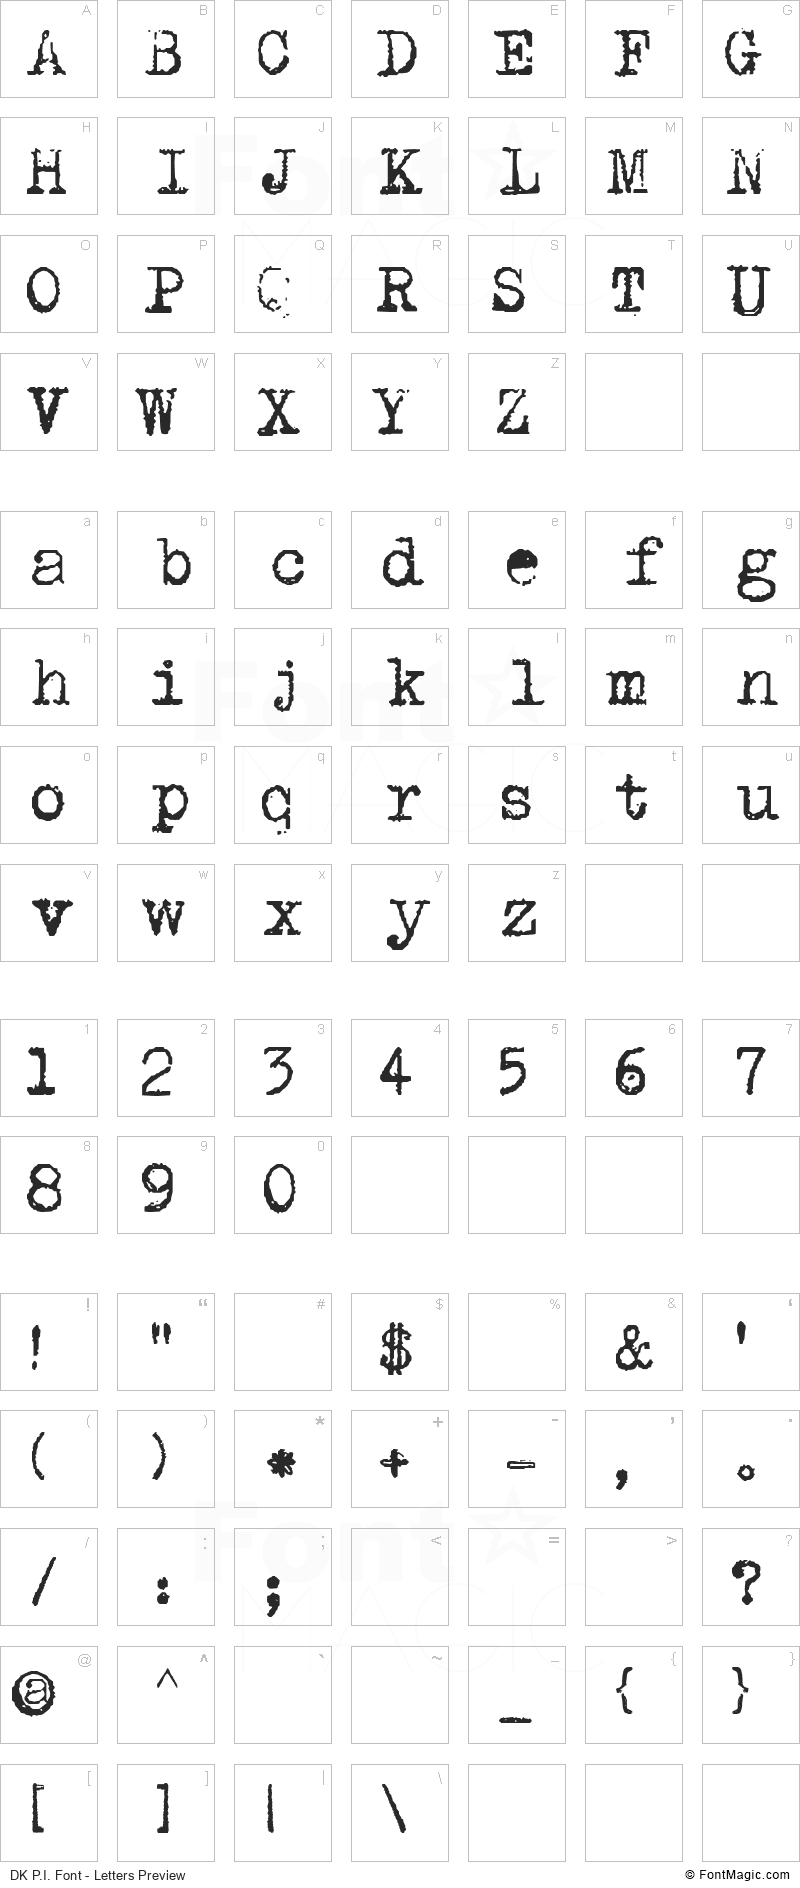 DK P.I. Font - All Latters Preview Chart